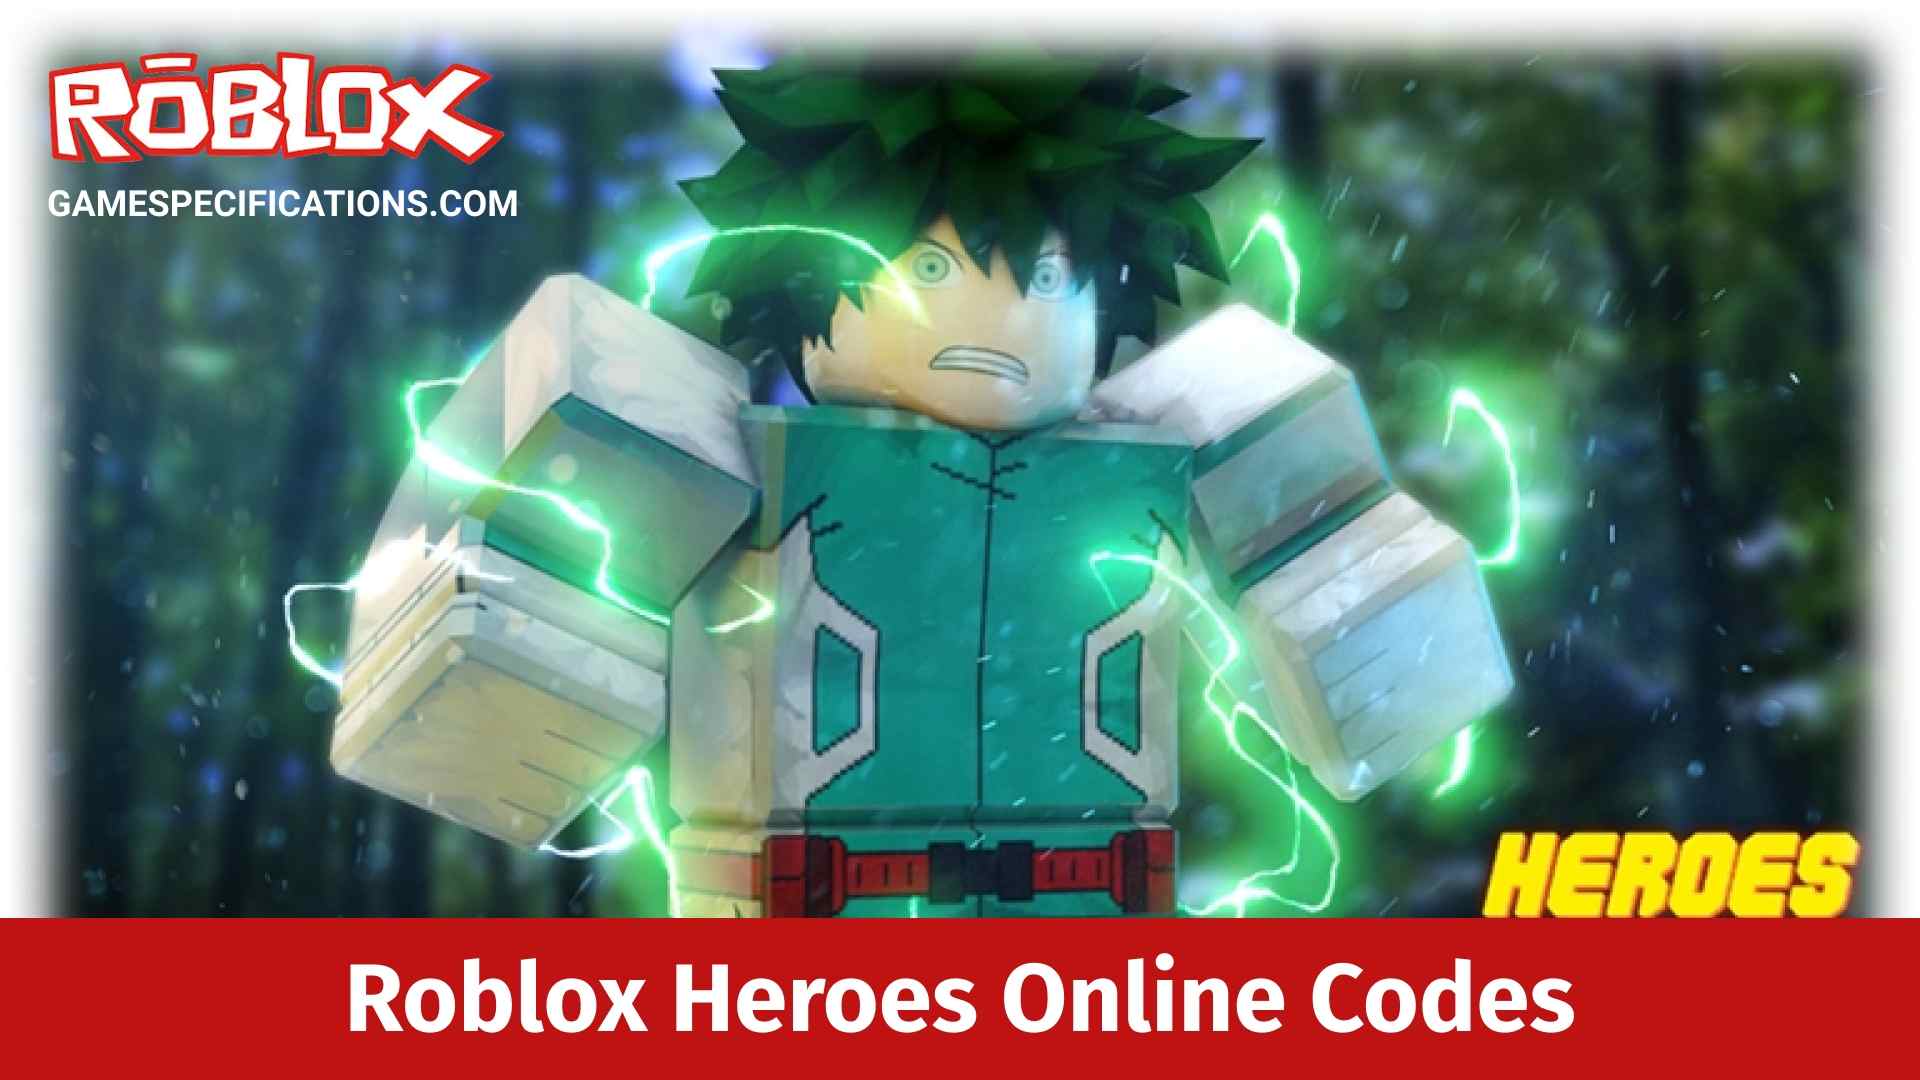 Roblox Heroes Online Codes July 2021 Game Specifications - how to equip skills on granny roblox